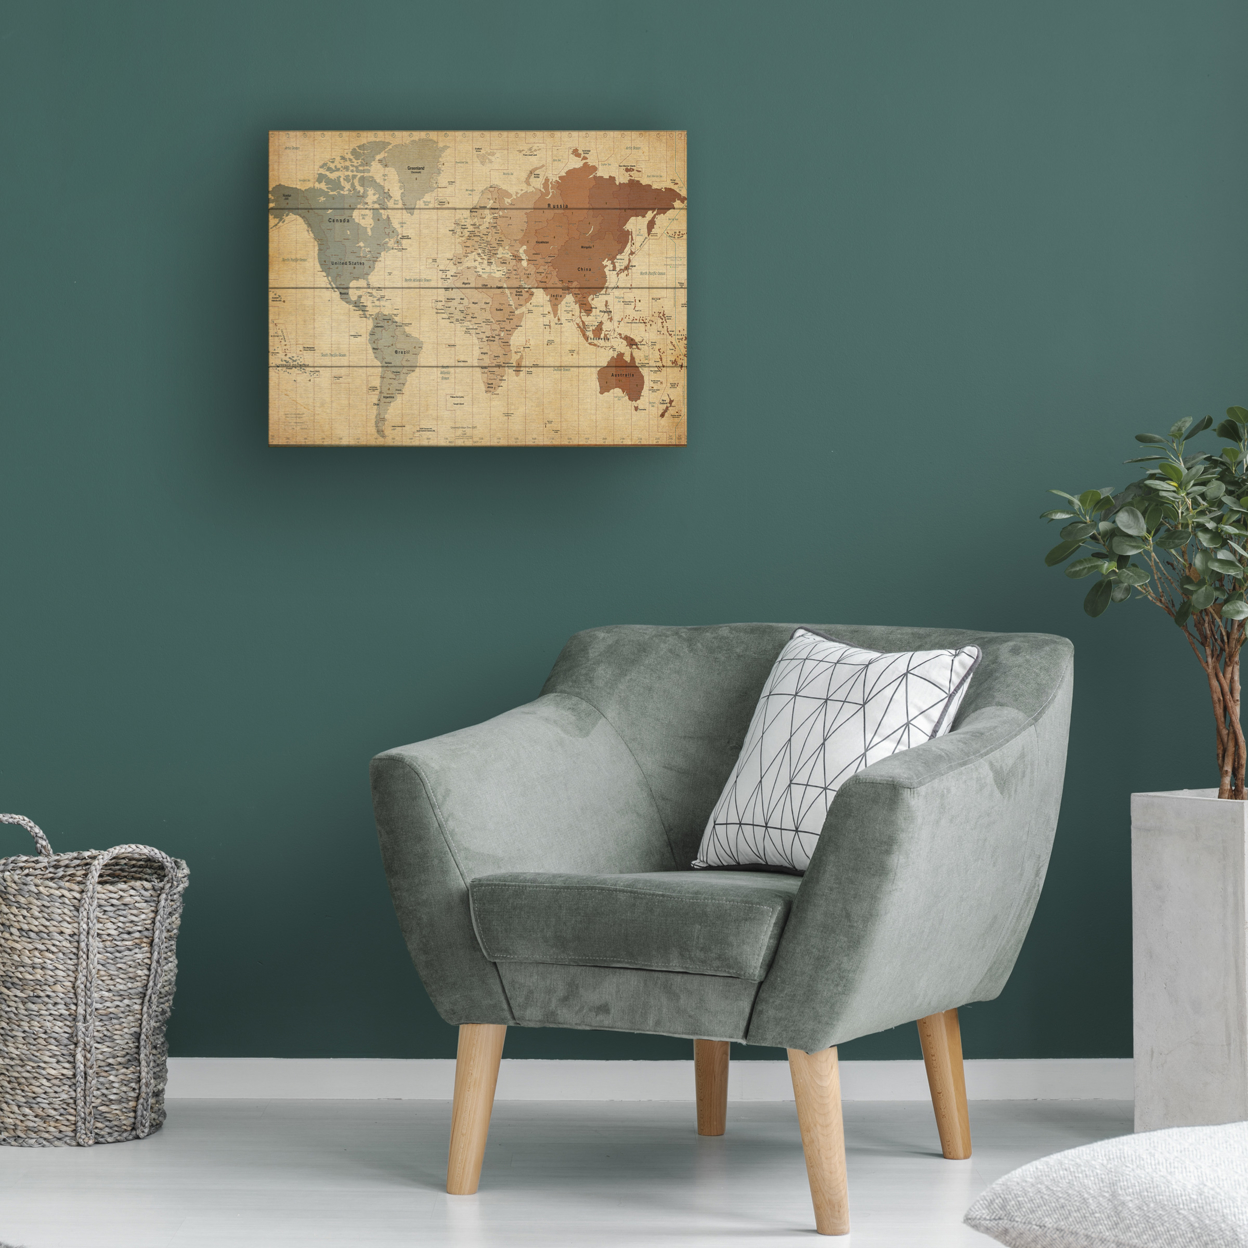 Wall Art 12 X 16 Inches Titled Time Zones Map Of The World Ready To Hang Printed On Wooden Planks